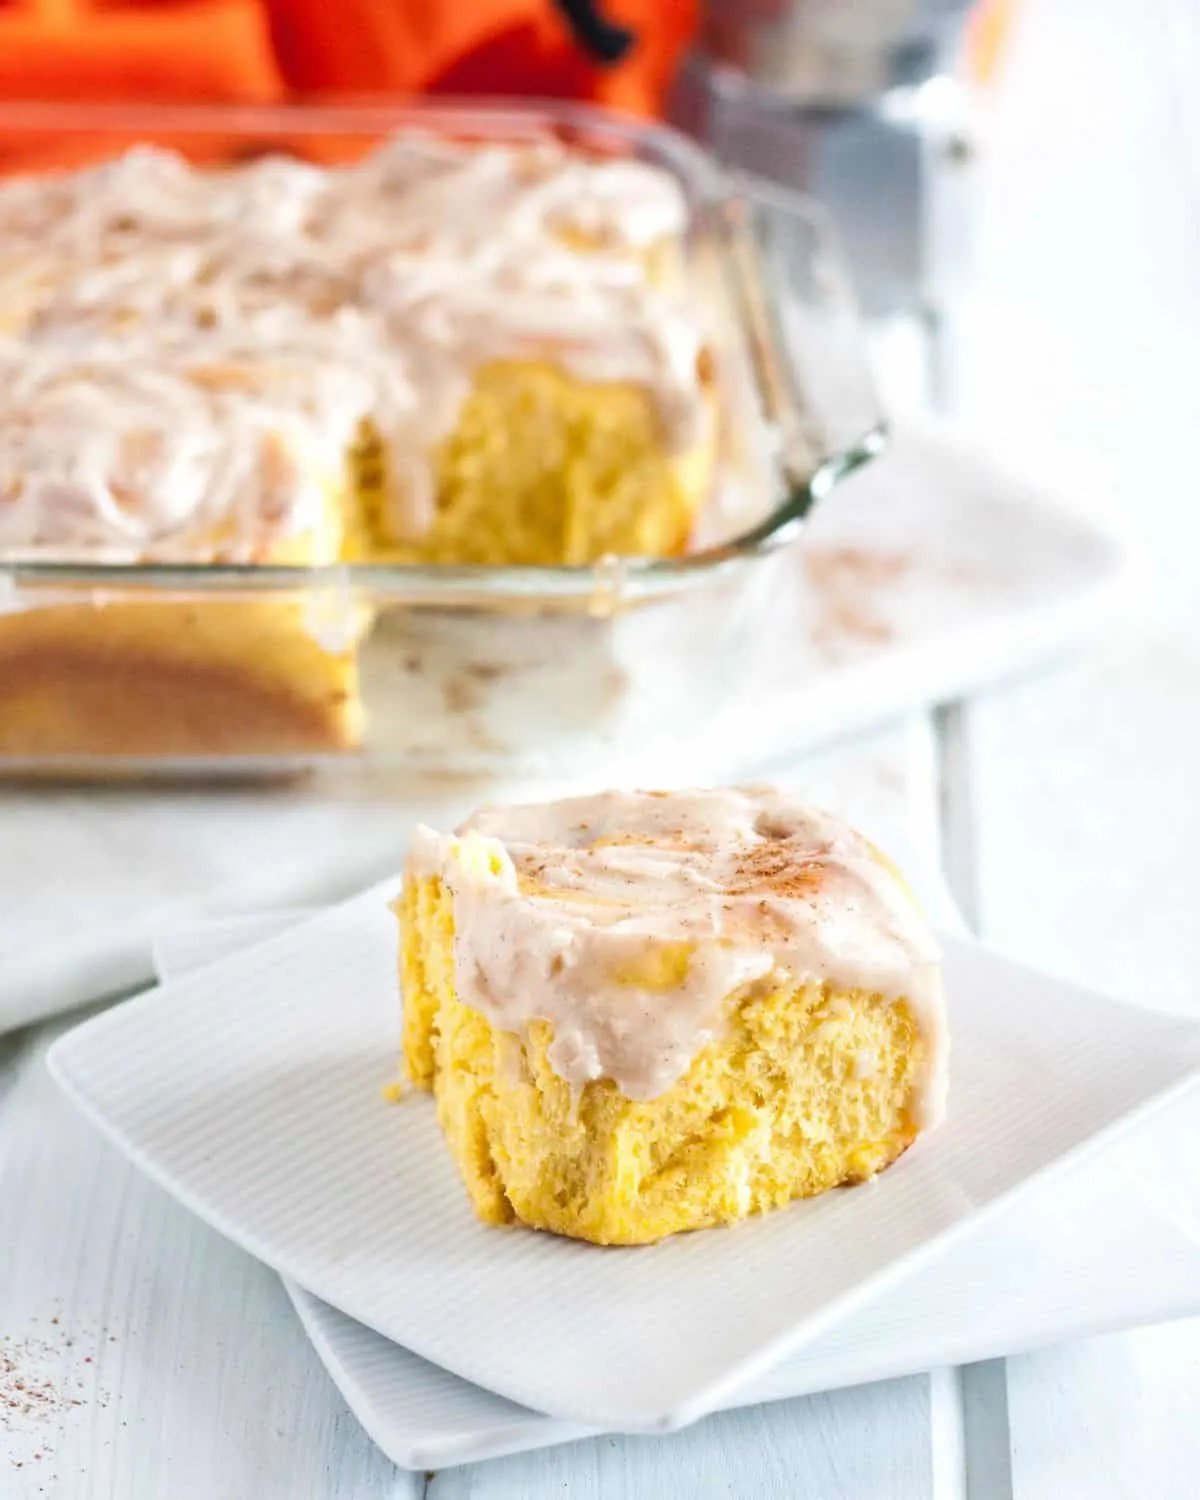 Prep these from scratch pumpkin cinnamon rolls the night before and bake the next morning for an amazing breakfast treat! With pumpkin in both the batter and filling, this may just be the only pumpkin cinnamon roll recipe you'll need!